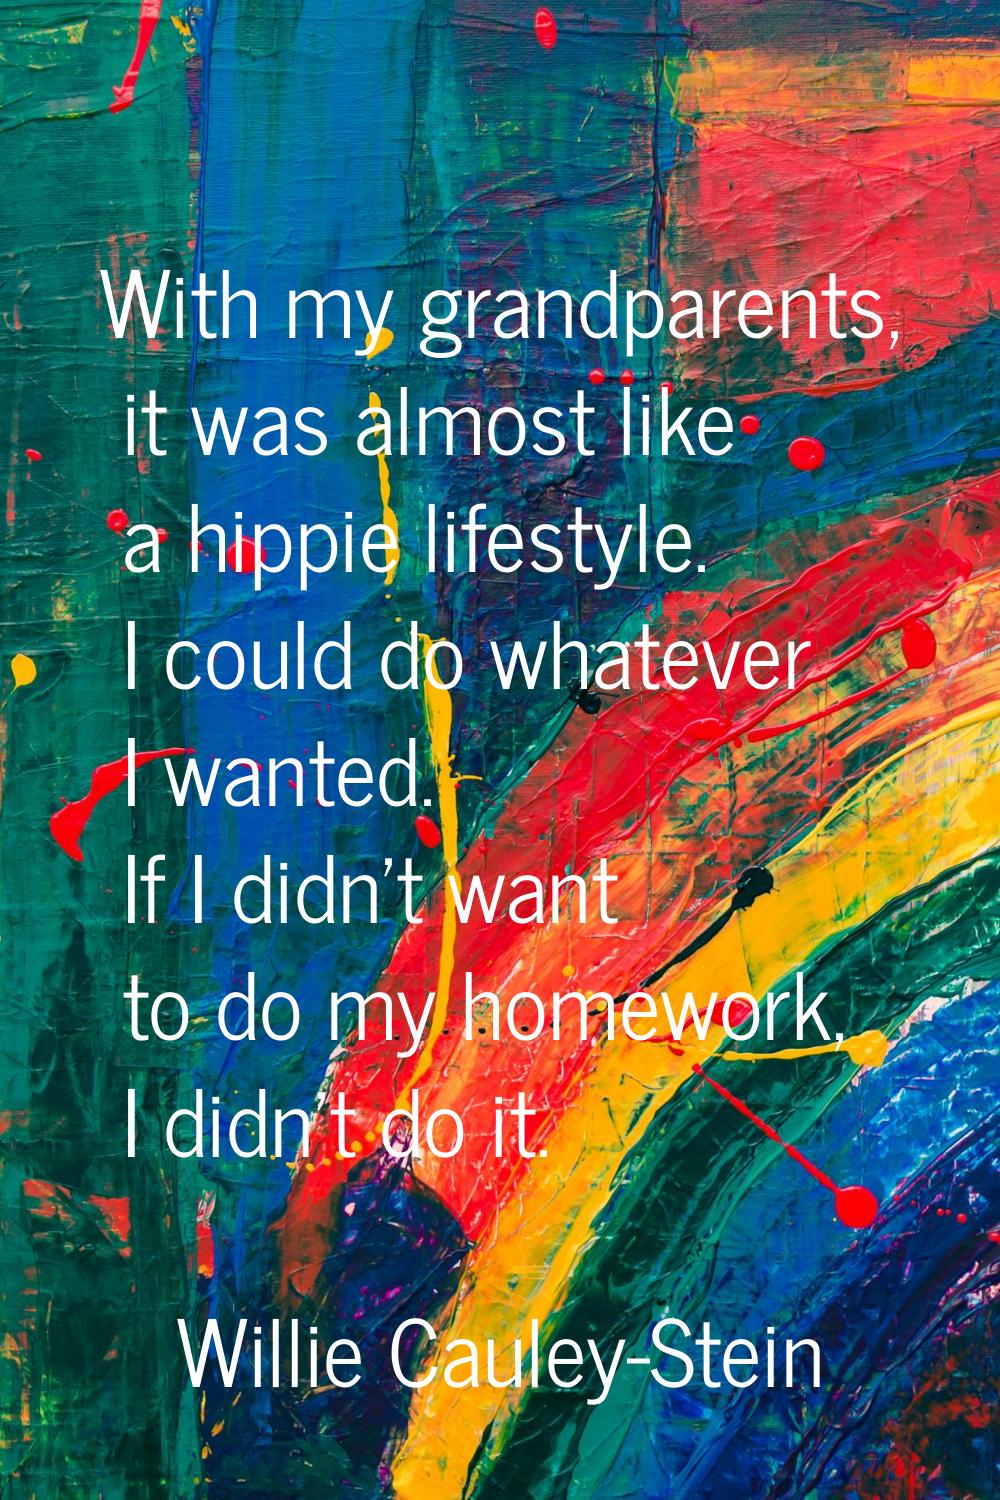 With my grandparents, it was almost like a hippie lifestyle. I could do whatever I wanted. If I did